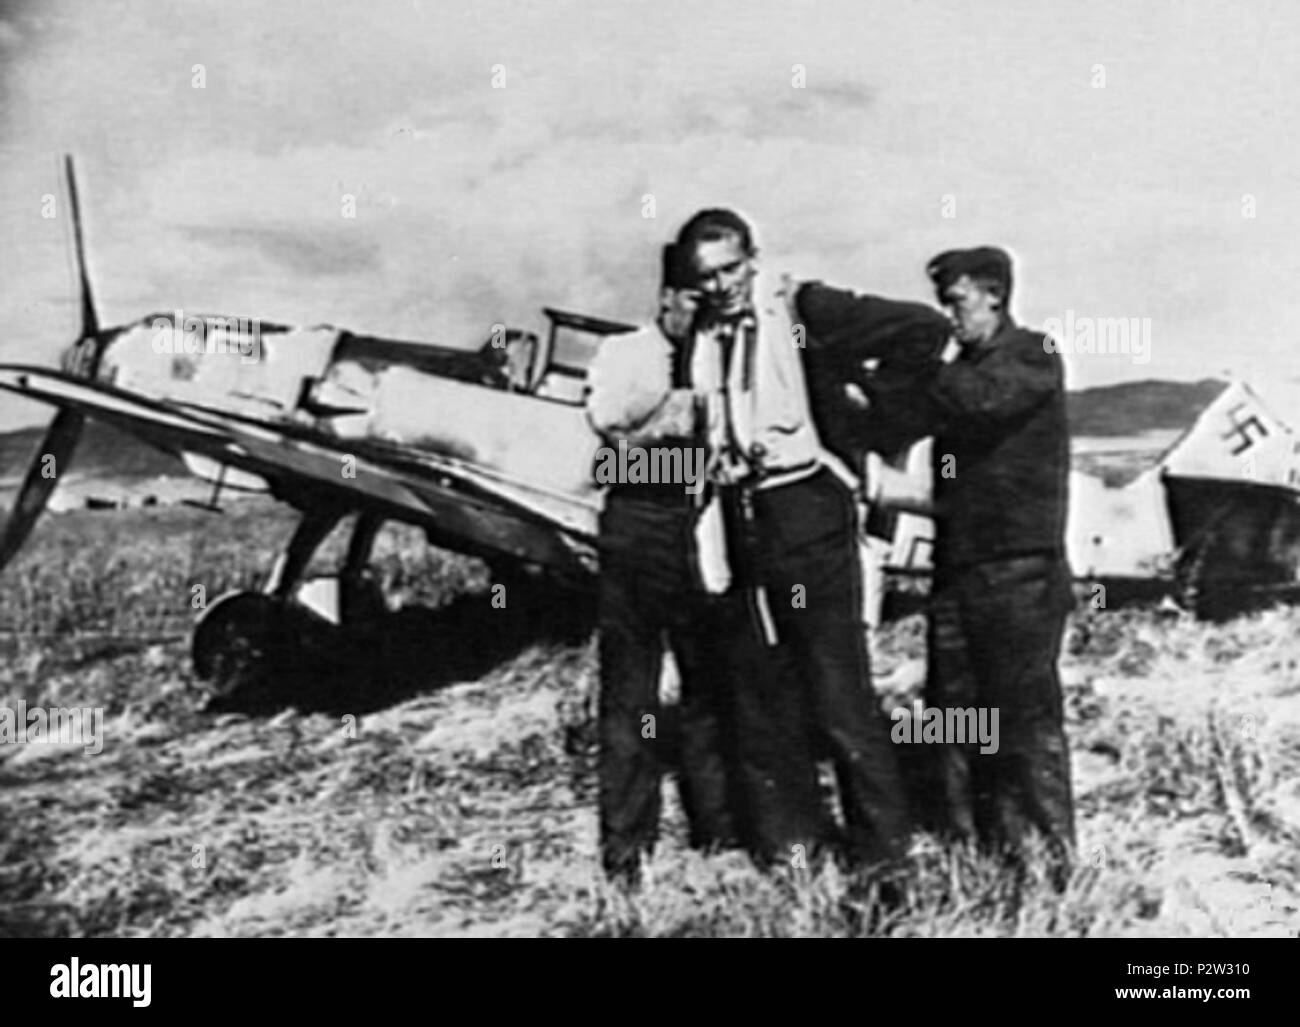 . German Luftwaffe pilot Erbo Graf von Kageneck, holder of the Knight's Cross of the Iron Cross with Oak Leaves, standing in front of his Messerschmitt Me 109E in Sicily, Italy, whilst being assisted by two ground crew personnel. Von Kageneck, responsible for the destruction of 69 allied aircraft, was later shot down by RAAF pilot, Flying Officer Clive R. Caldwell, (who was attached to 250 squadron, Royal Air Force) on the afternoon of 24 December 1941 near Derna in Libya. Kageneck later died in the flight to a hospital in Naples on 12 January 1942. 1941. Unknown 26 Erbo Graf von Kageneck with Stock Photo